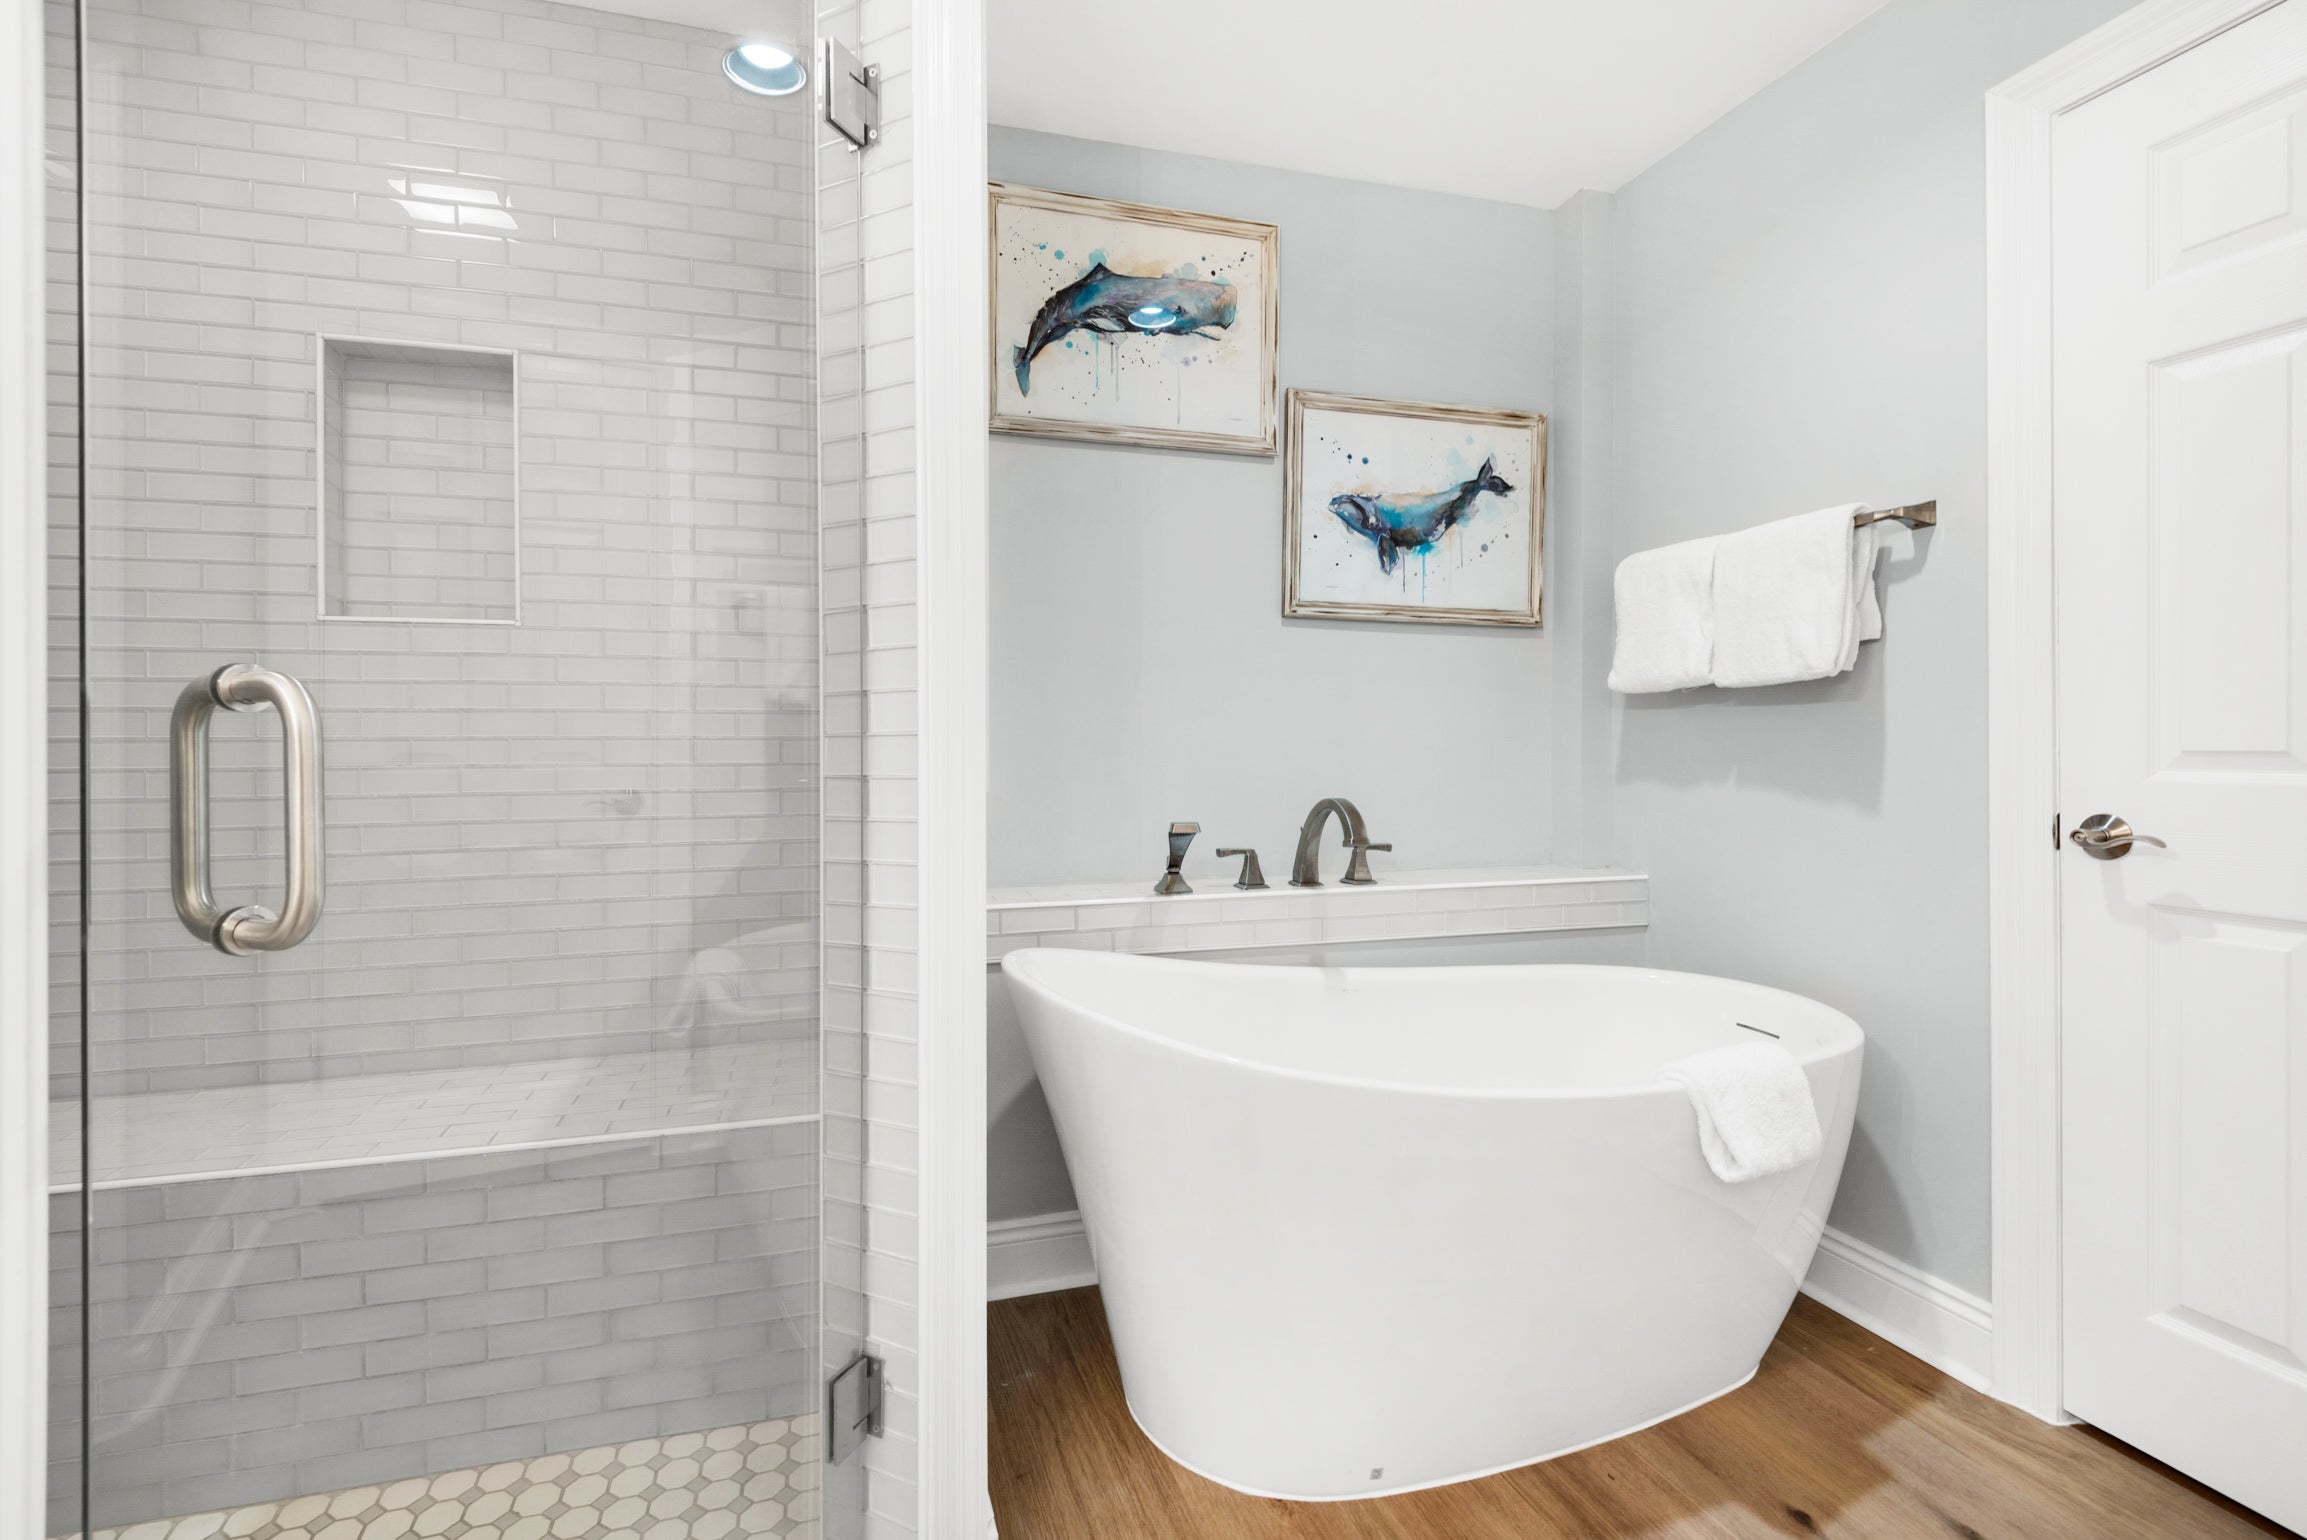 Walk-in shower and stand alone tub